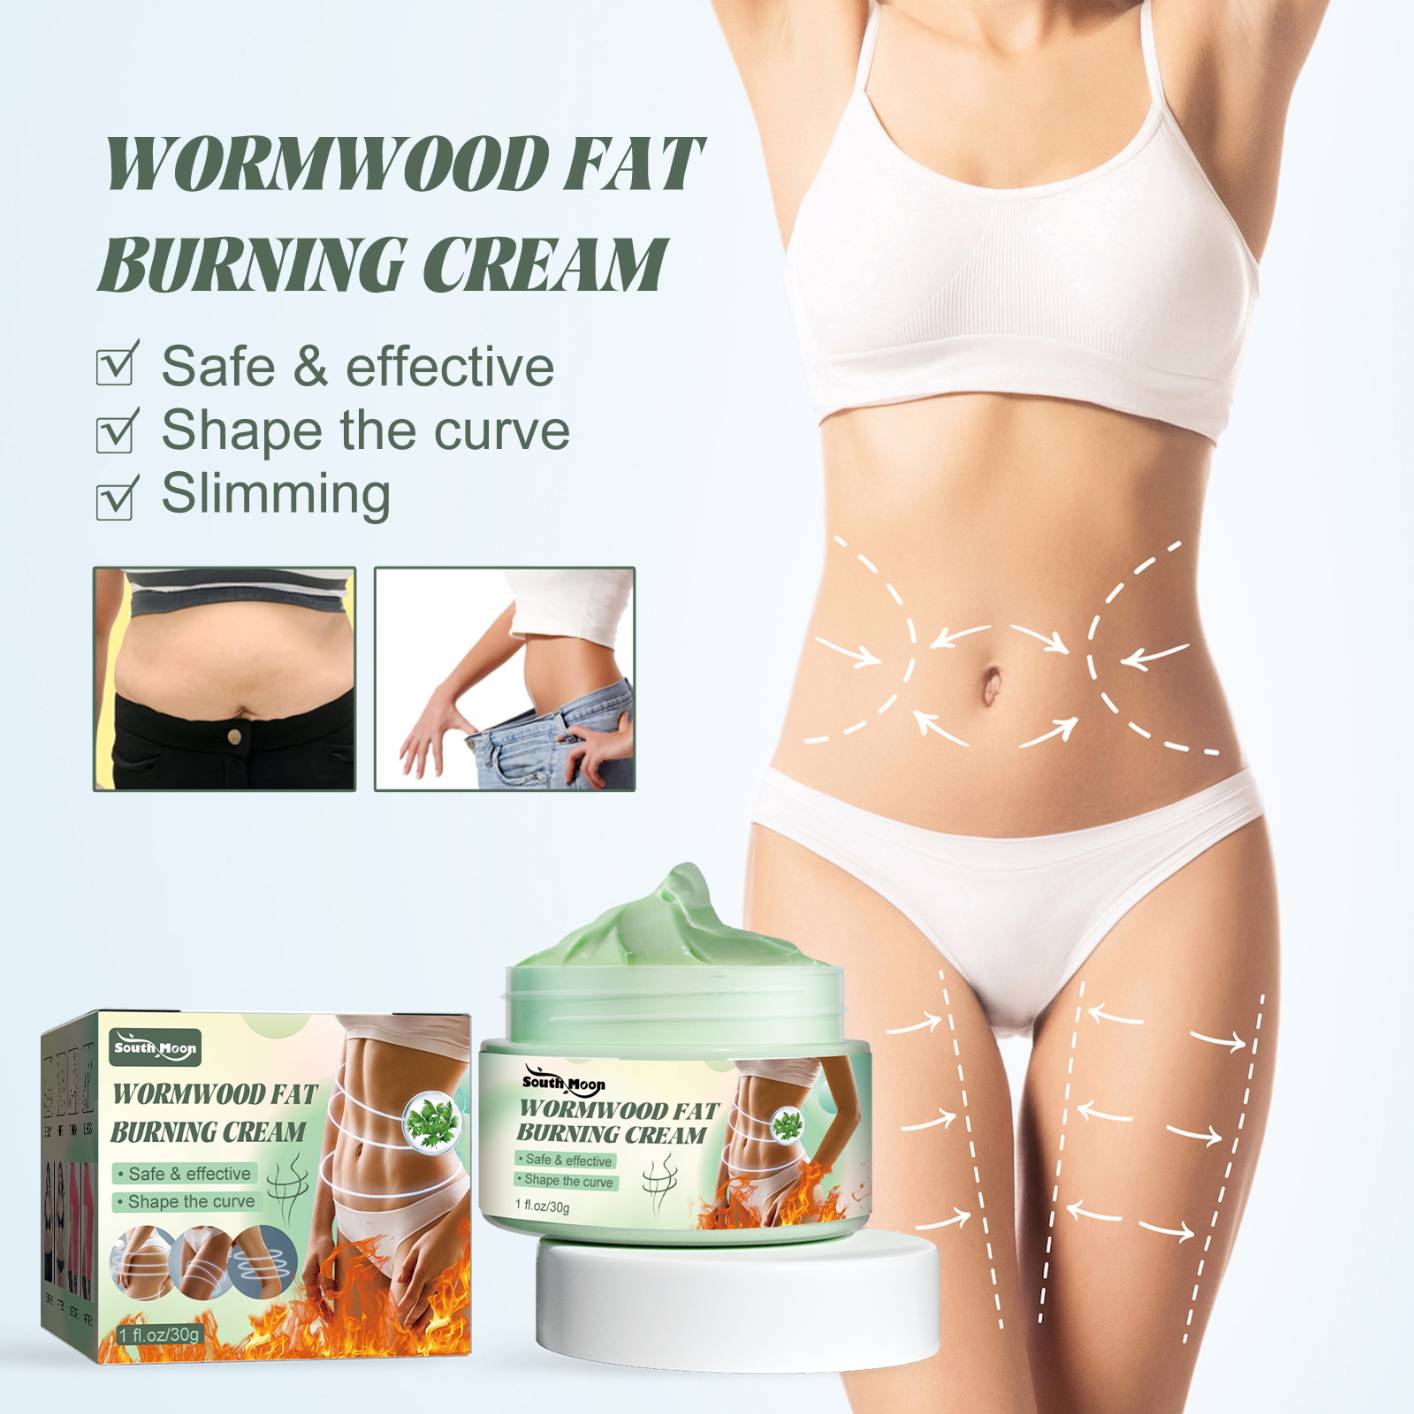 South Moon Wormwood Fat Burning Cream Body Sculpting Weight Loss Anti-cellulite Slimming Shaping Firming Body Skin Nourishing Massage Care
